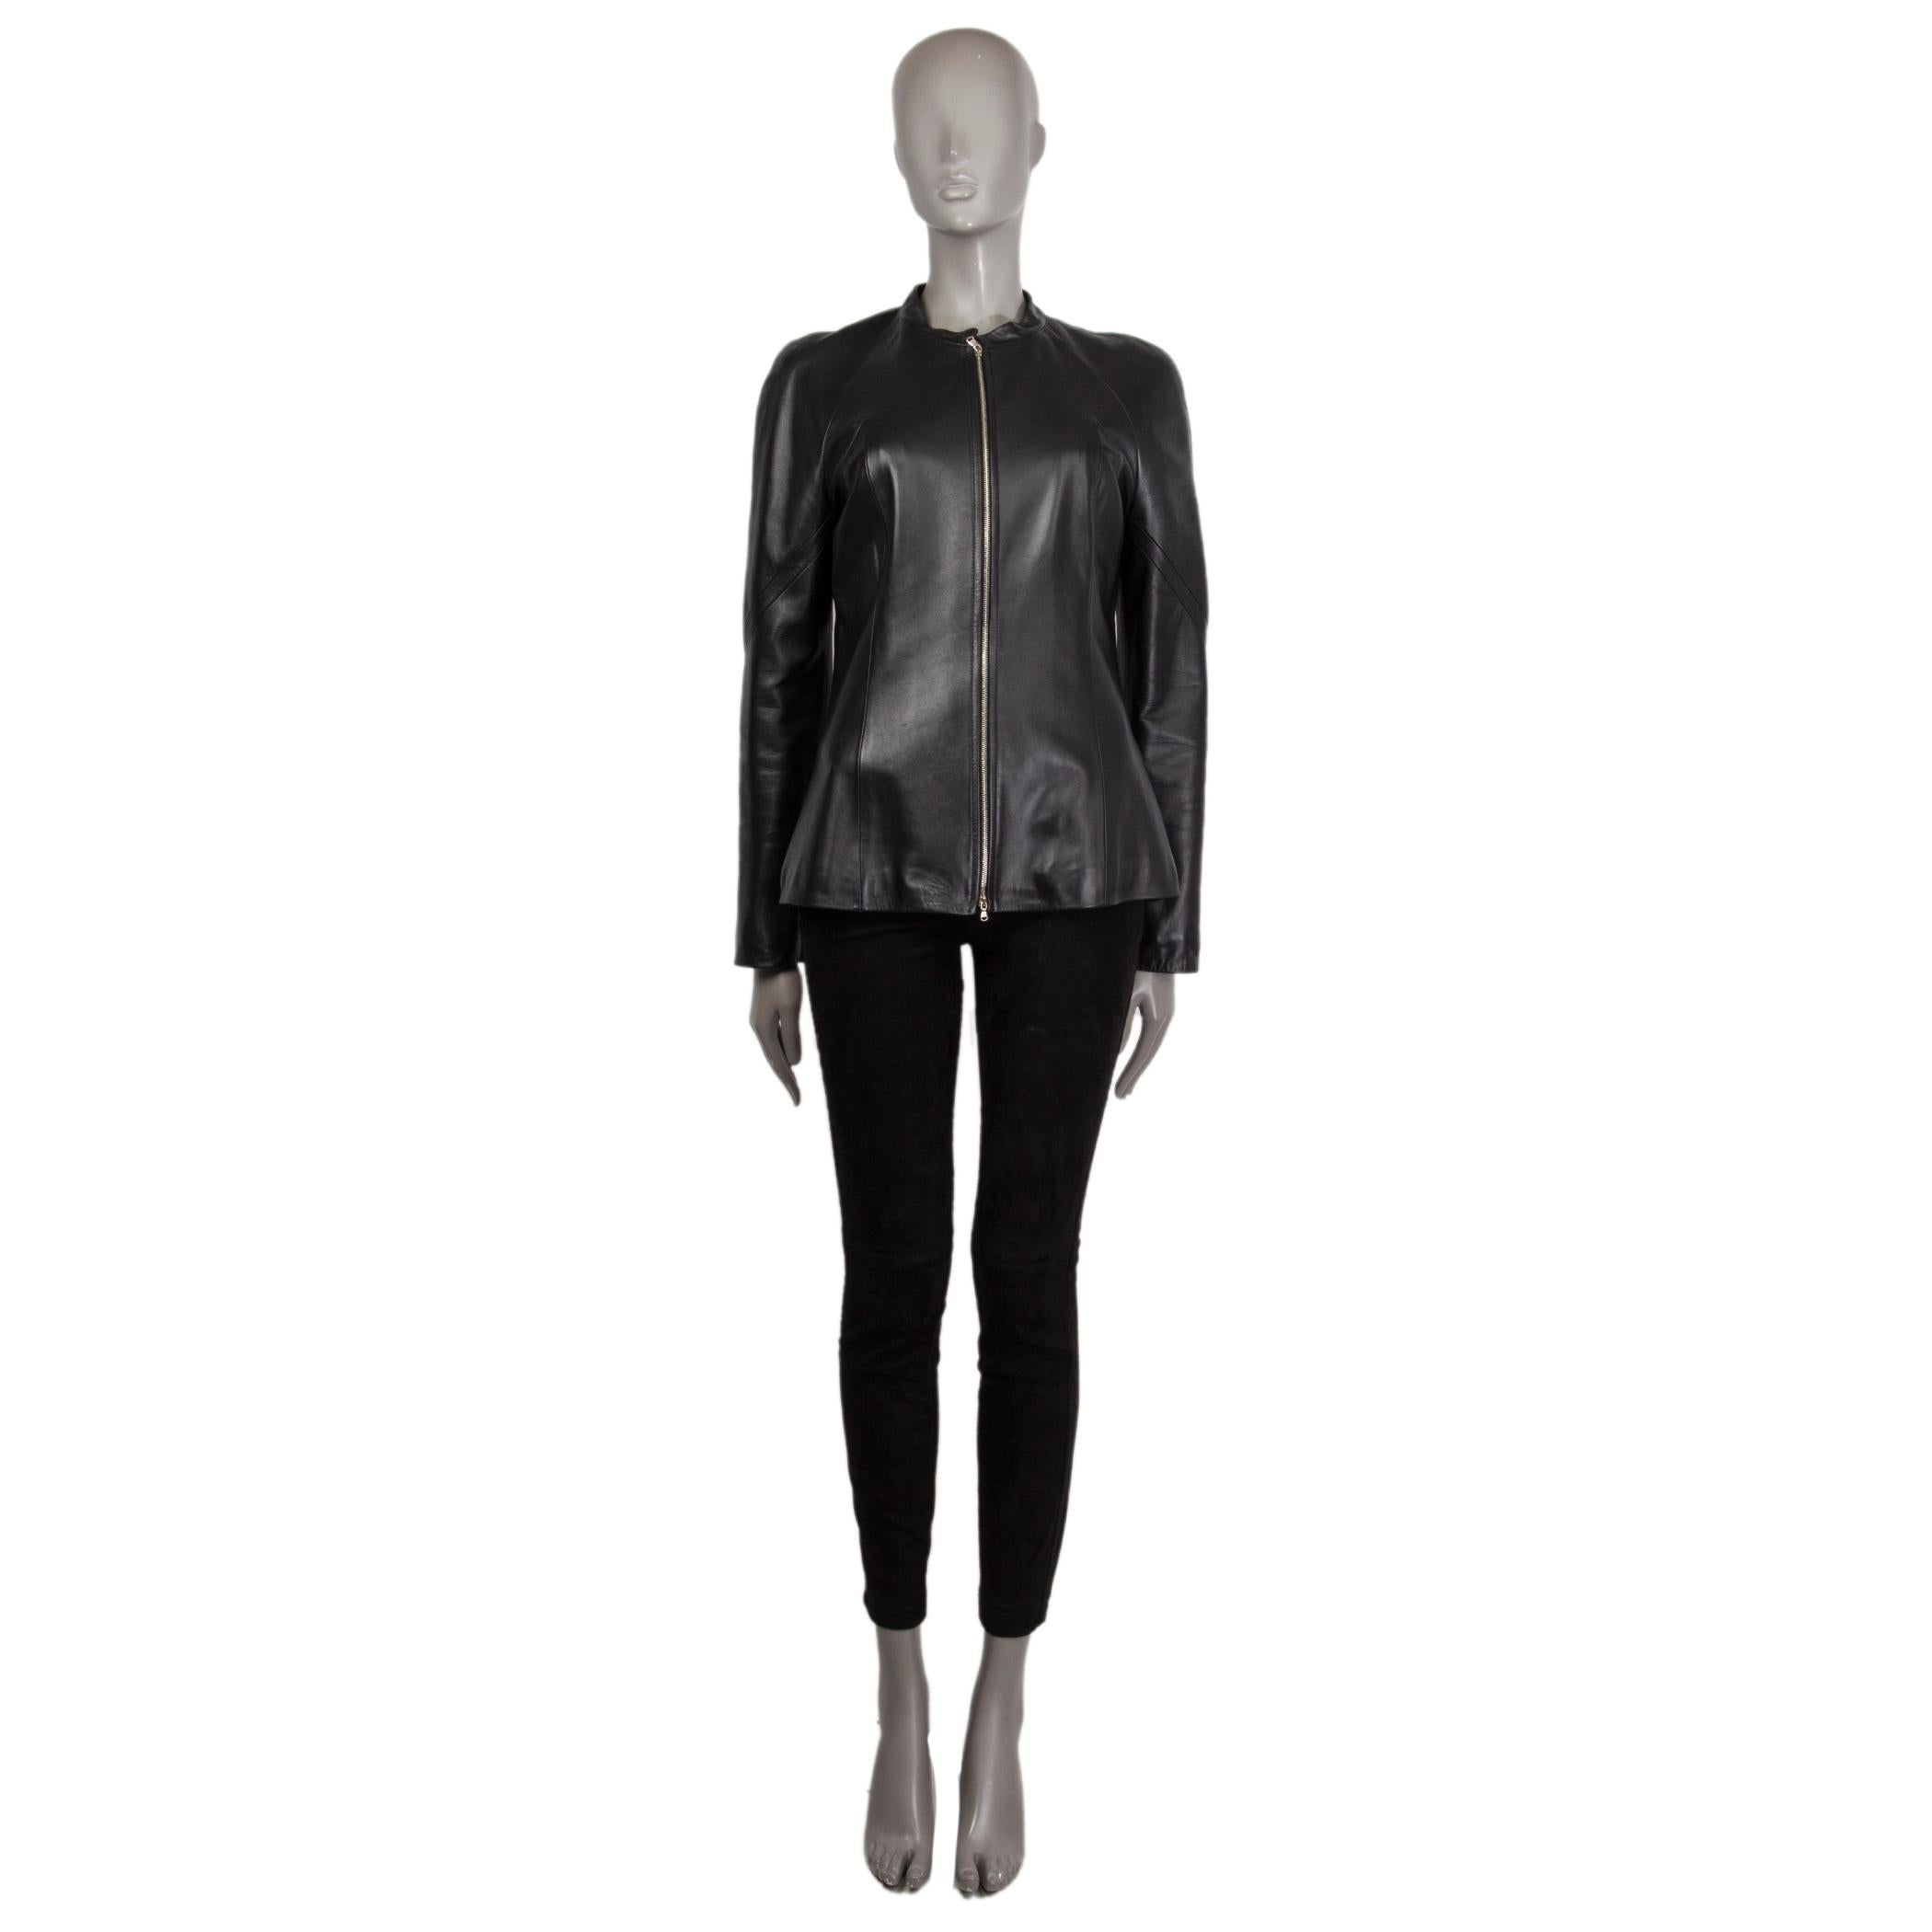 100% authentic Loewe band-collar jacket in black lambskin. With raglan sleeves. Closes with two-way silver-tone zipper on the front. Lined in quilted fabric. Has been worn and is in excellent condition. 

Measurements
Tag Size	42
Size	M
Bust